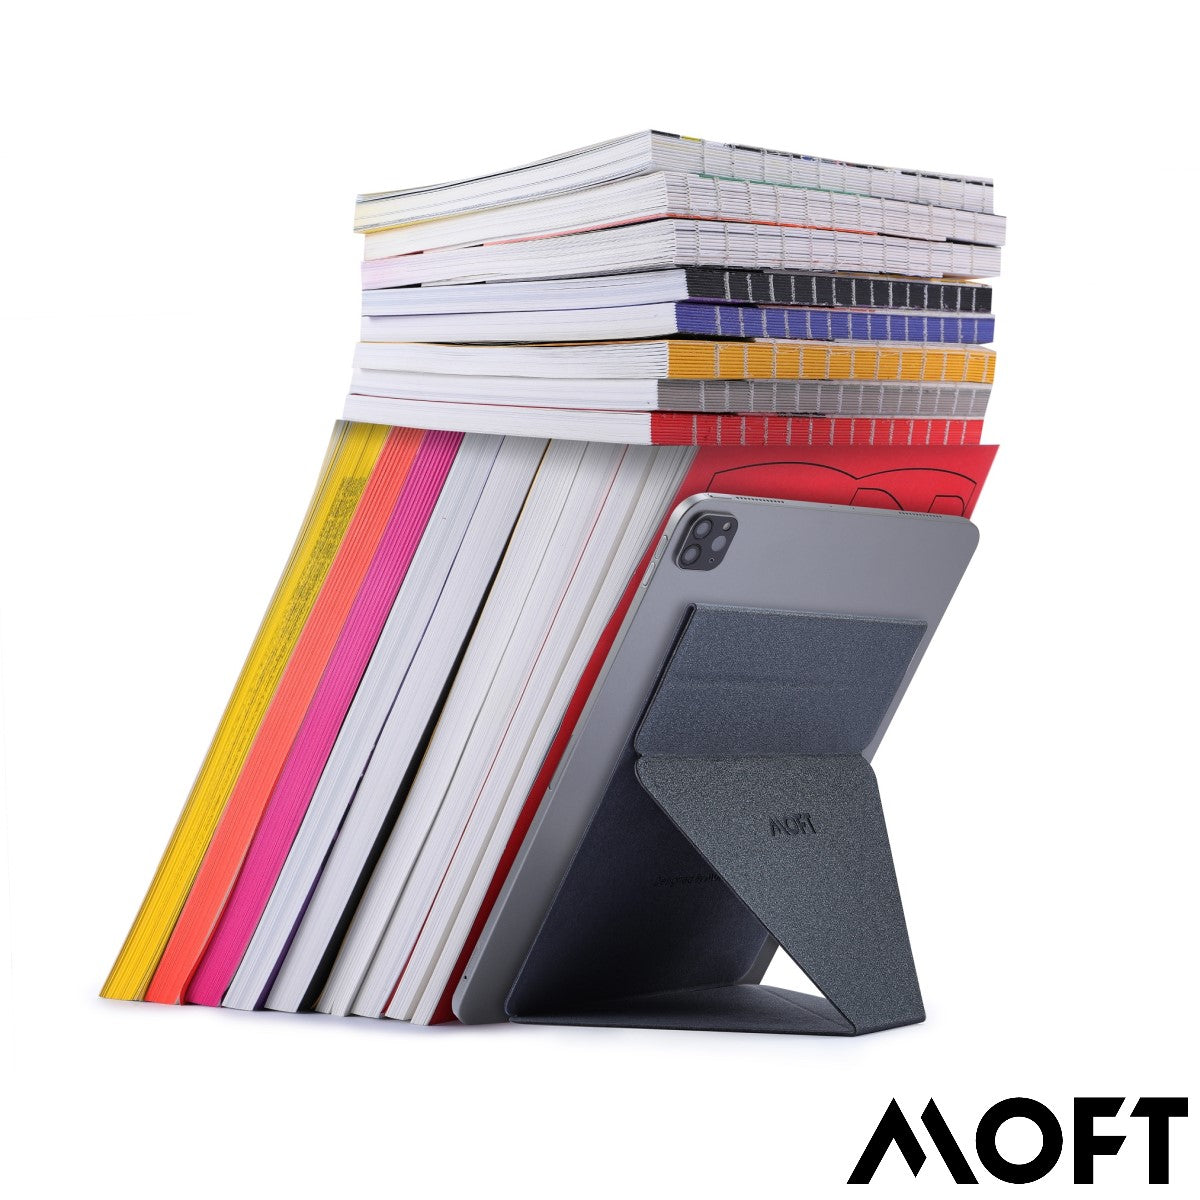 MOFT X Tablet Stand 7.9"